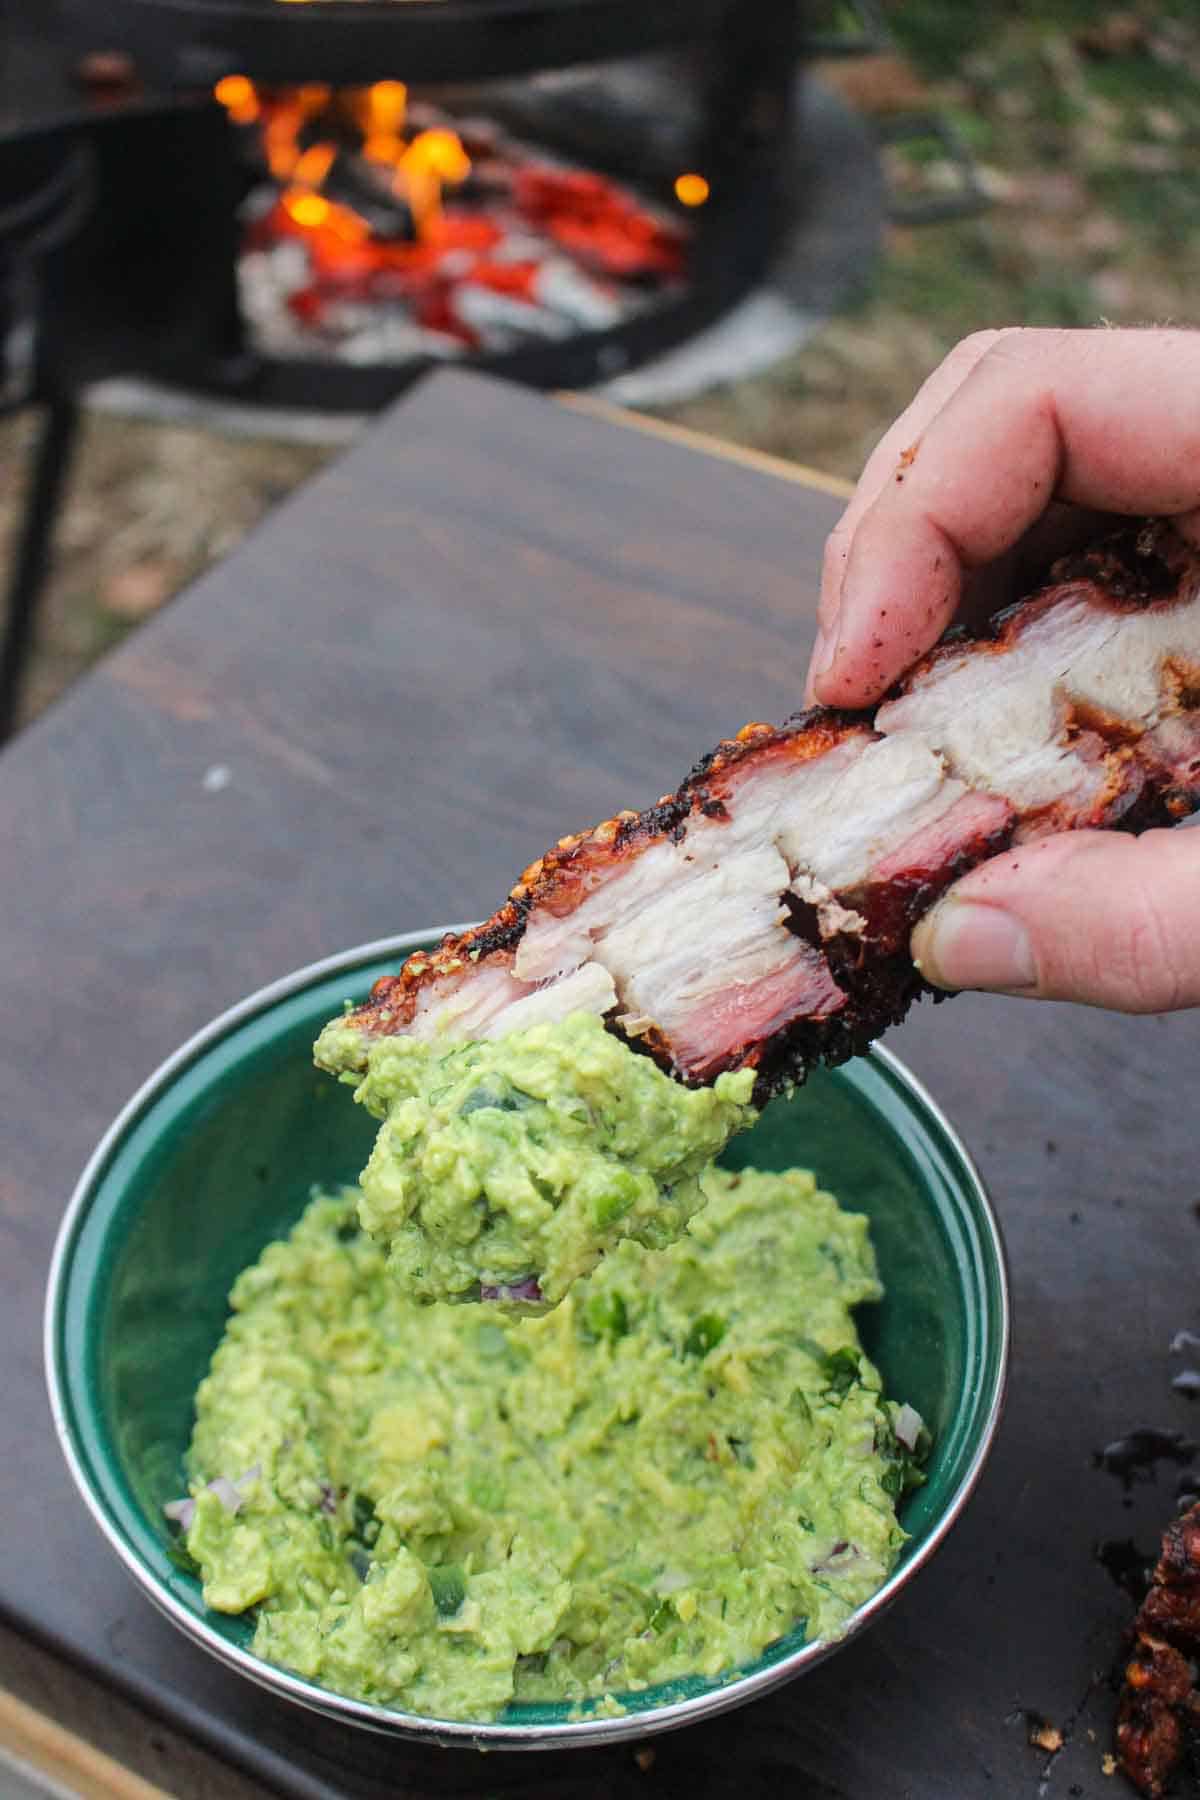 Each slice of fried pork belly is dipped into the fresh homemade guacamole. 